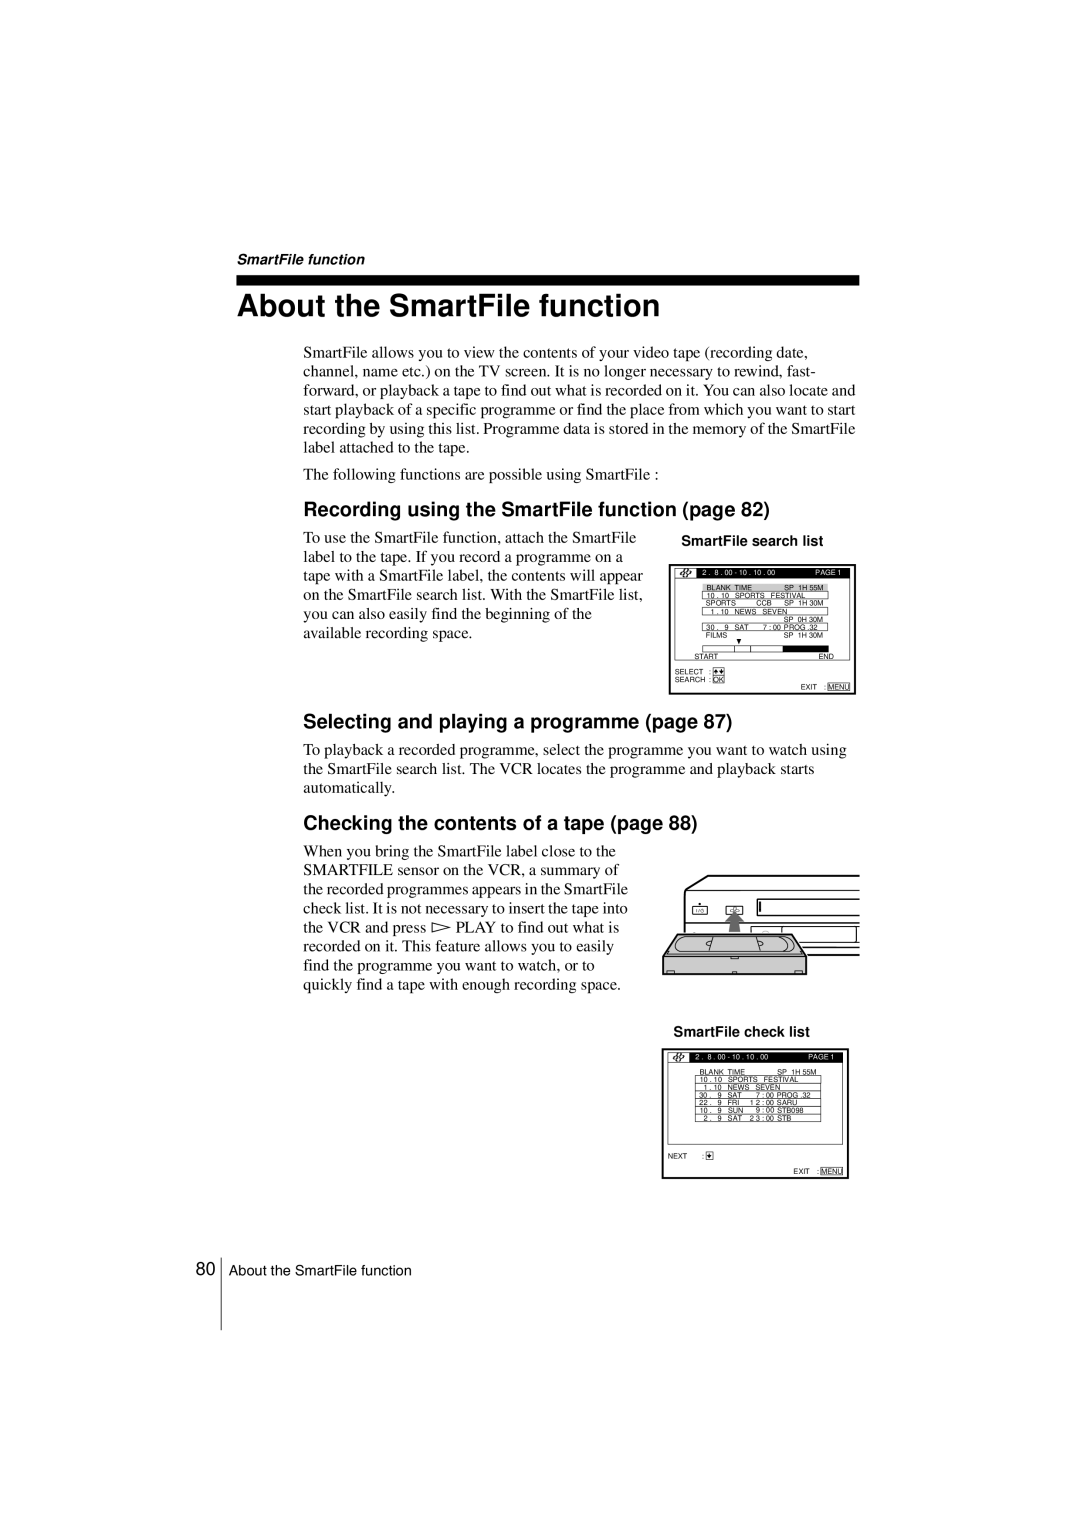 Sony SLV-SF990G manual About the SmartFile function, Recording using the SmartFile function page 